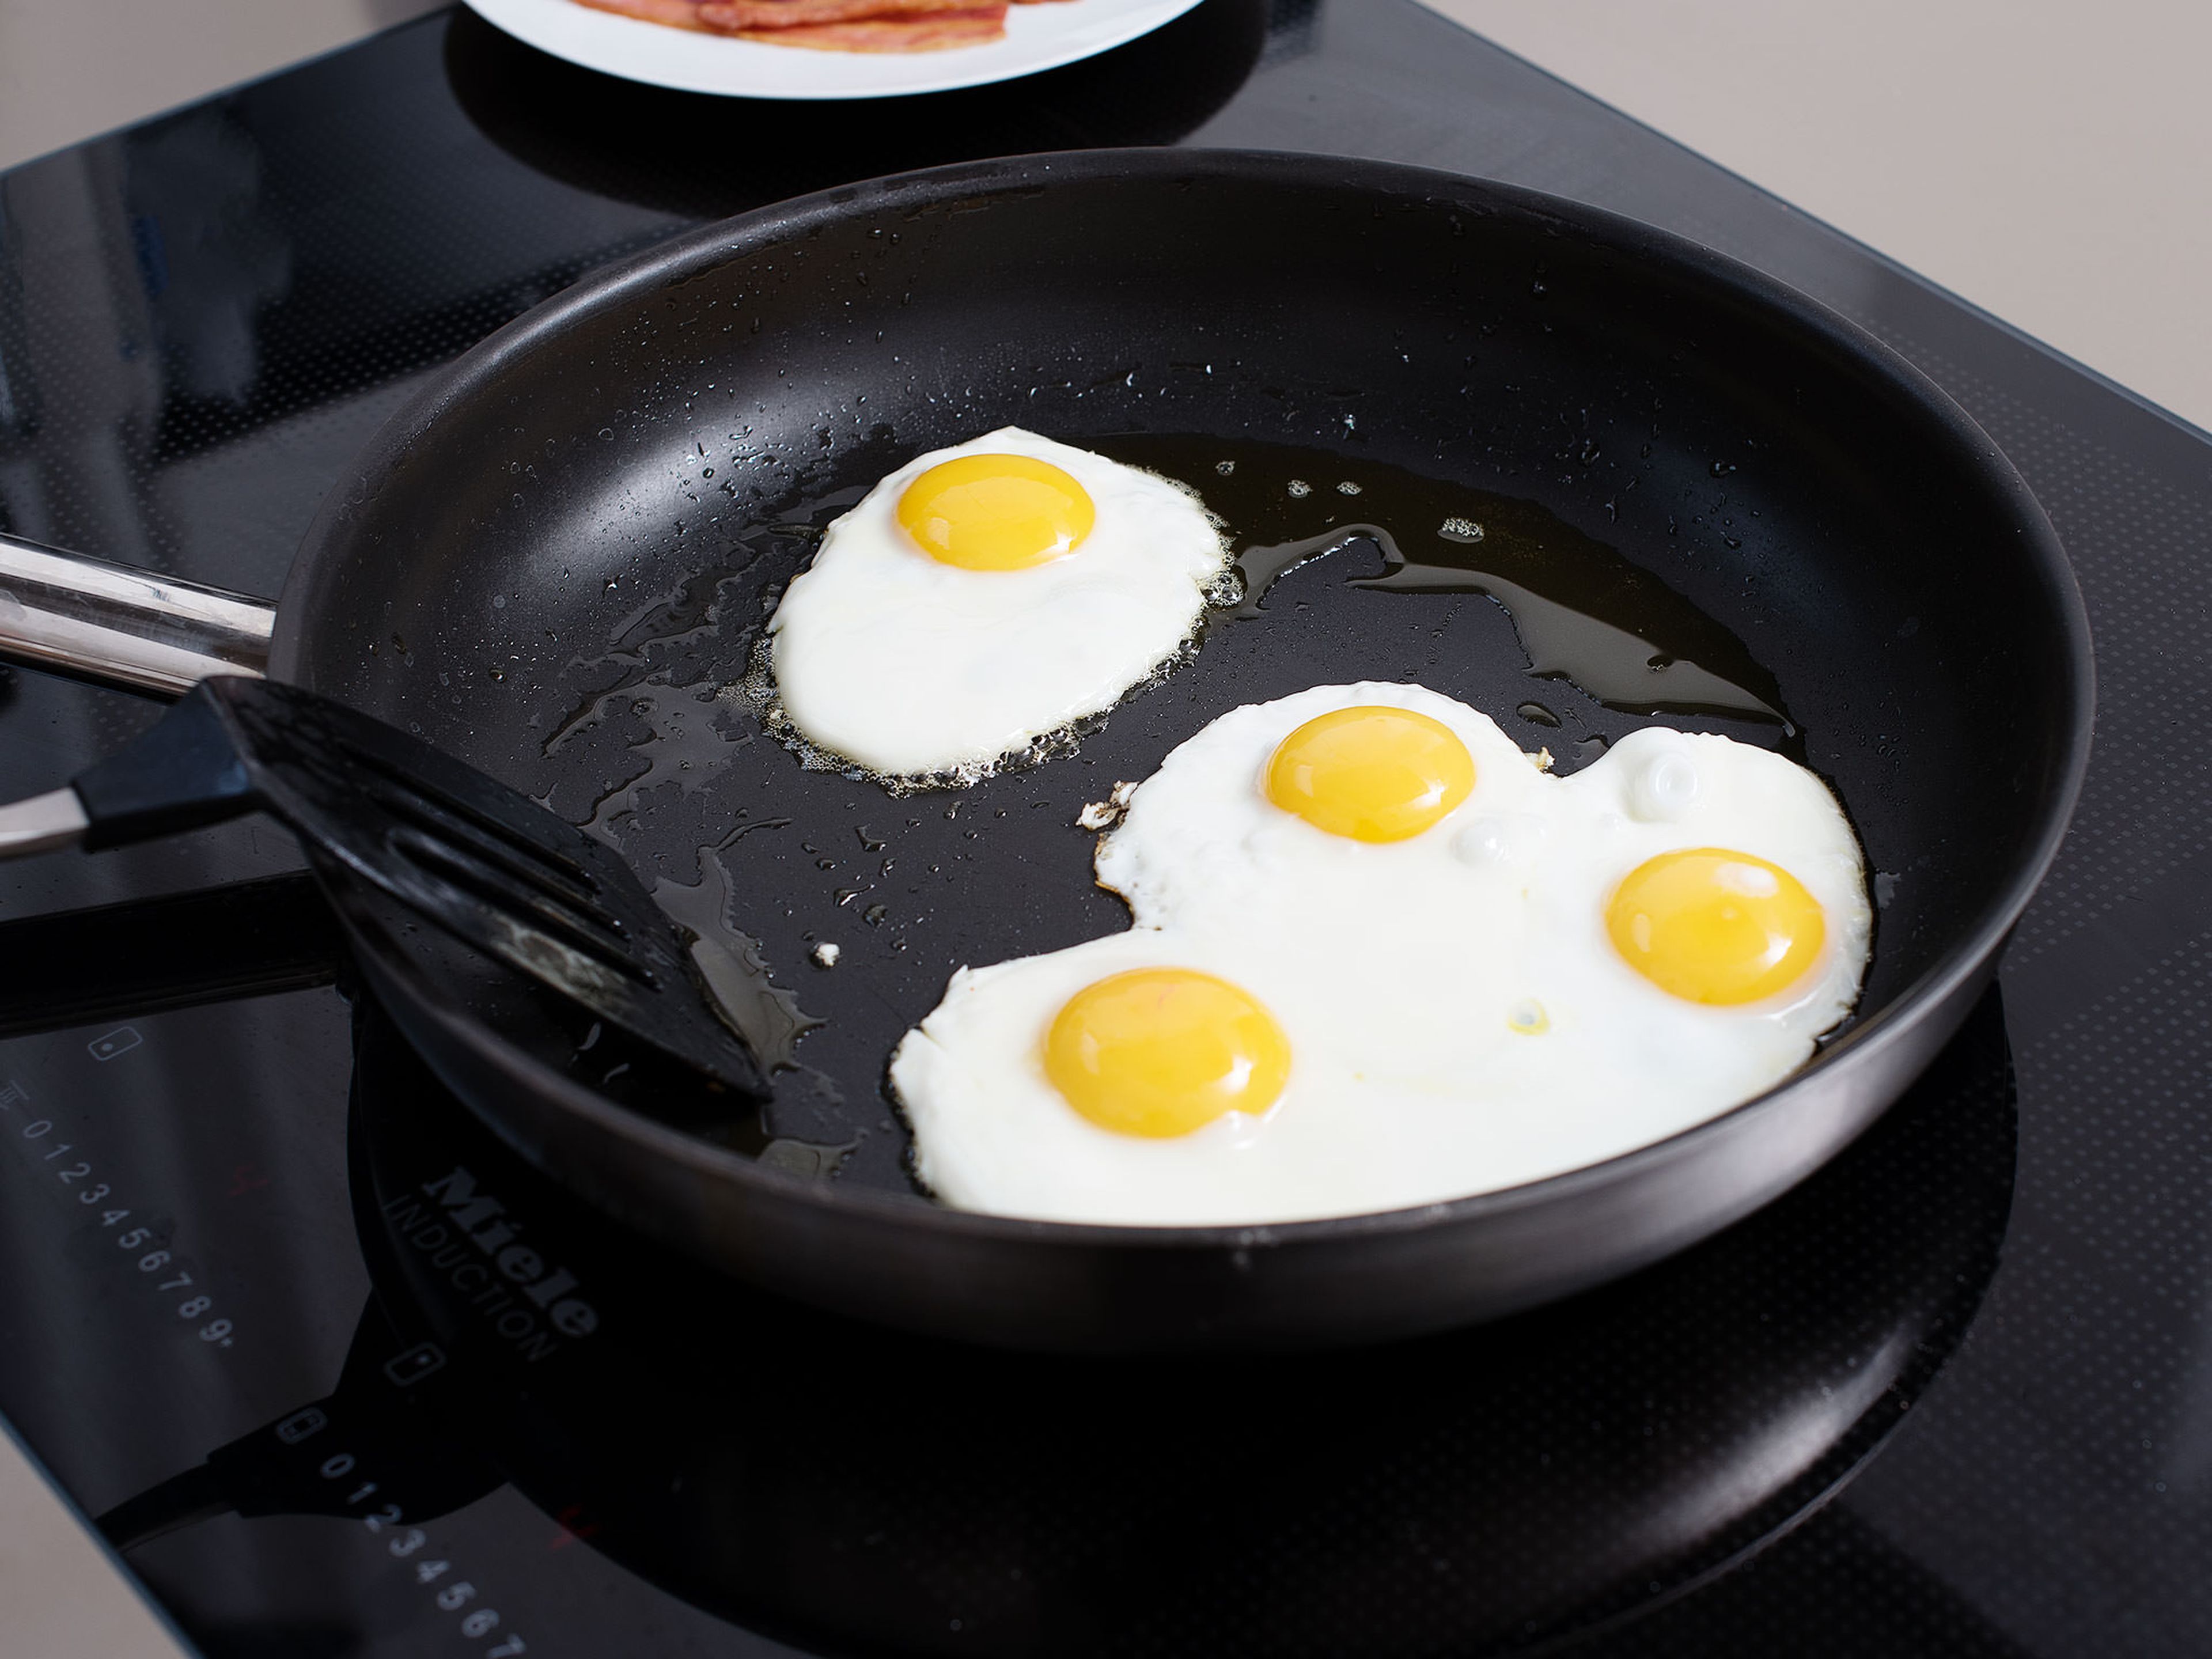 Heat some oil in a second frying pan and fry eggs for approx. 3 – 4 min. The egg yolk should be a bit runny and the edges, crisp. Season to taste with salt and pepper. Remove from pan and set aside.